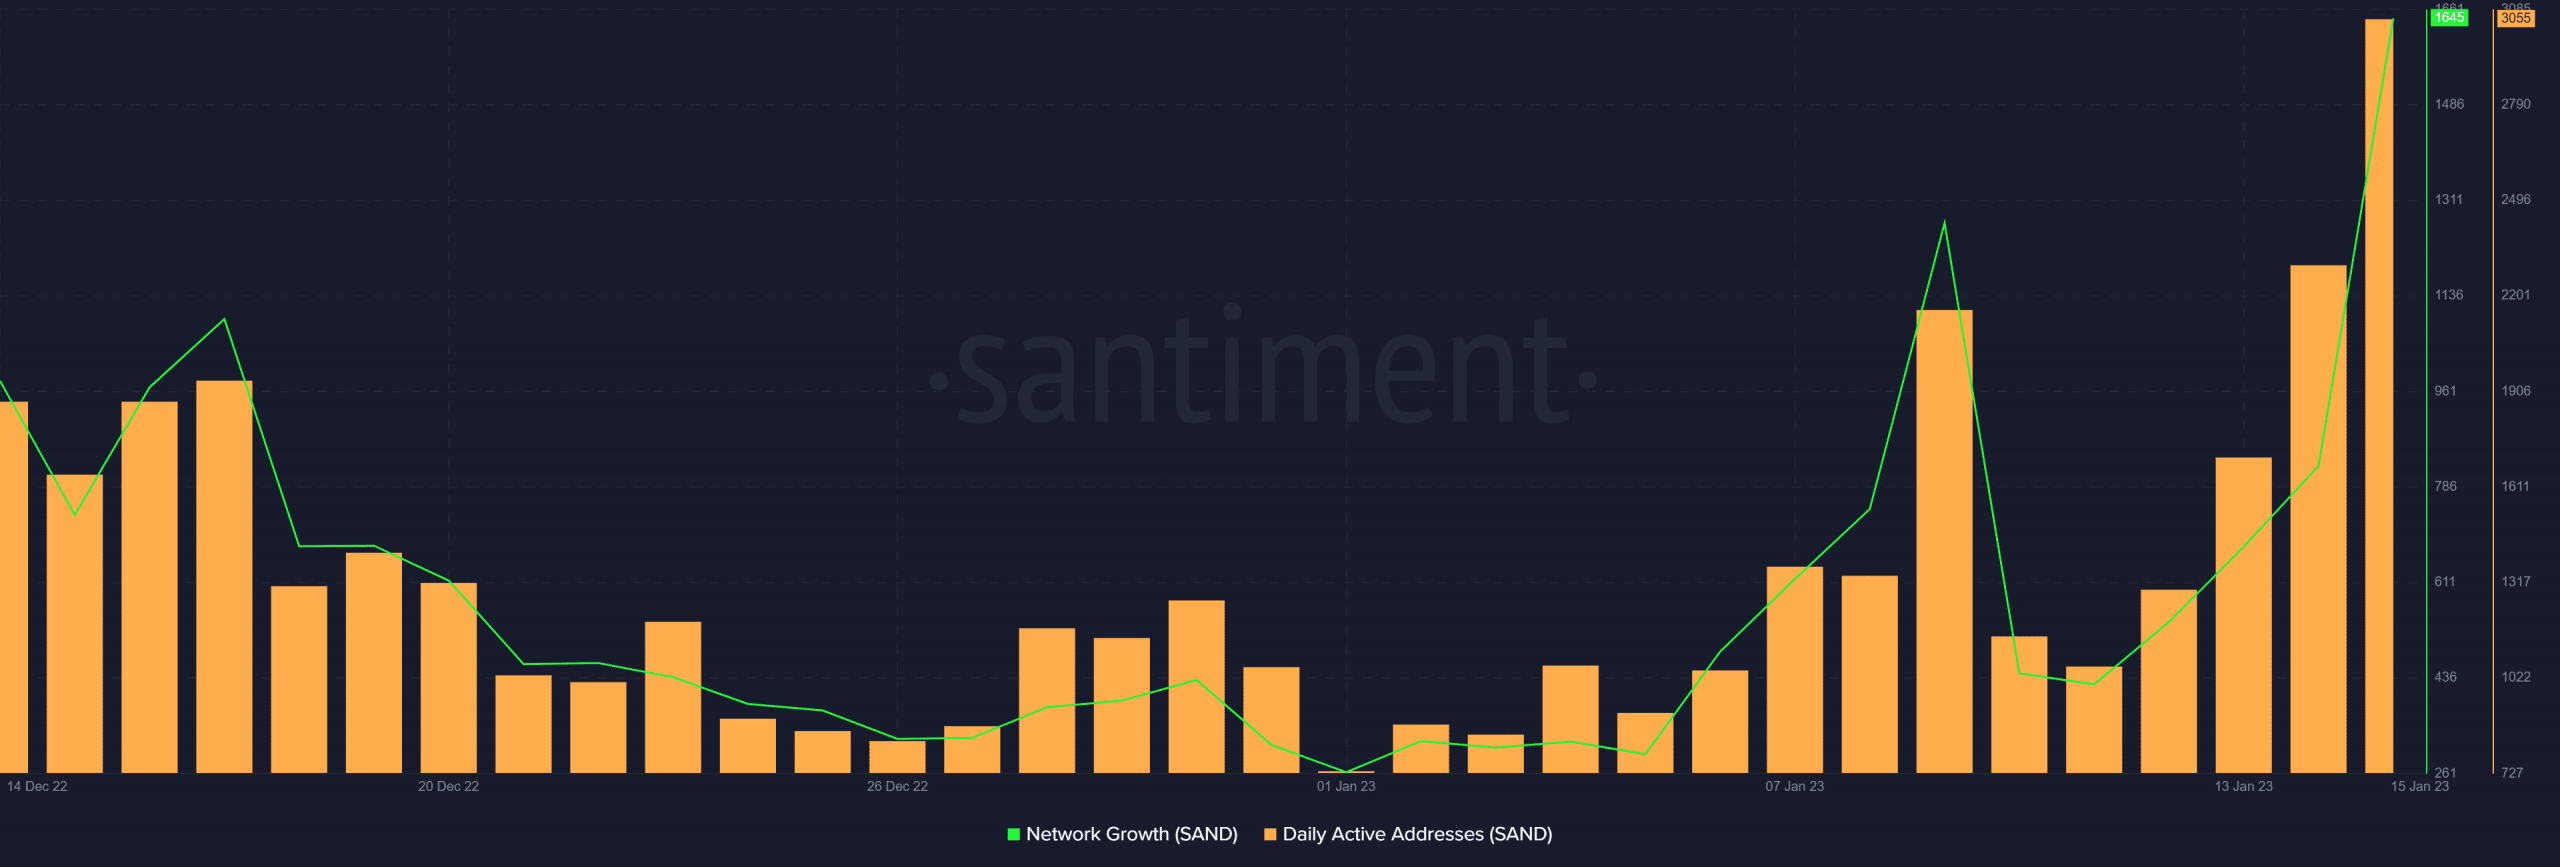 SAND network growth and daily active addresses